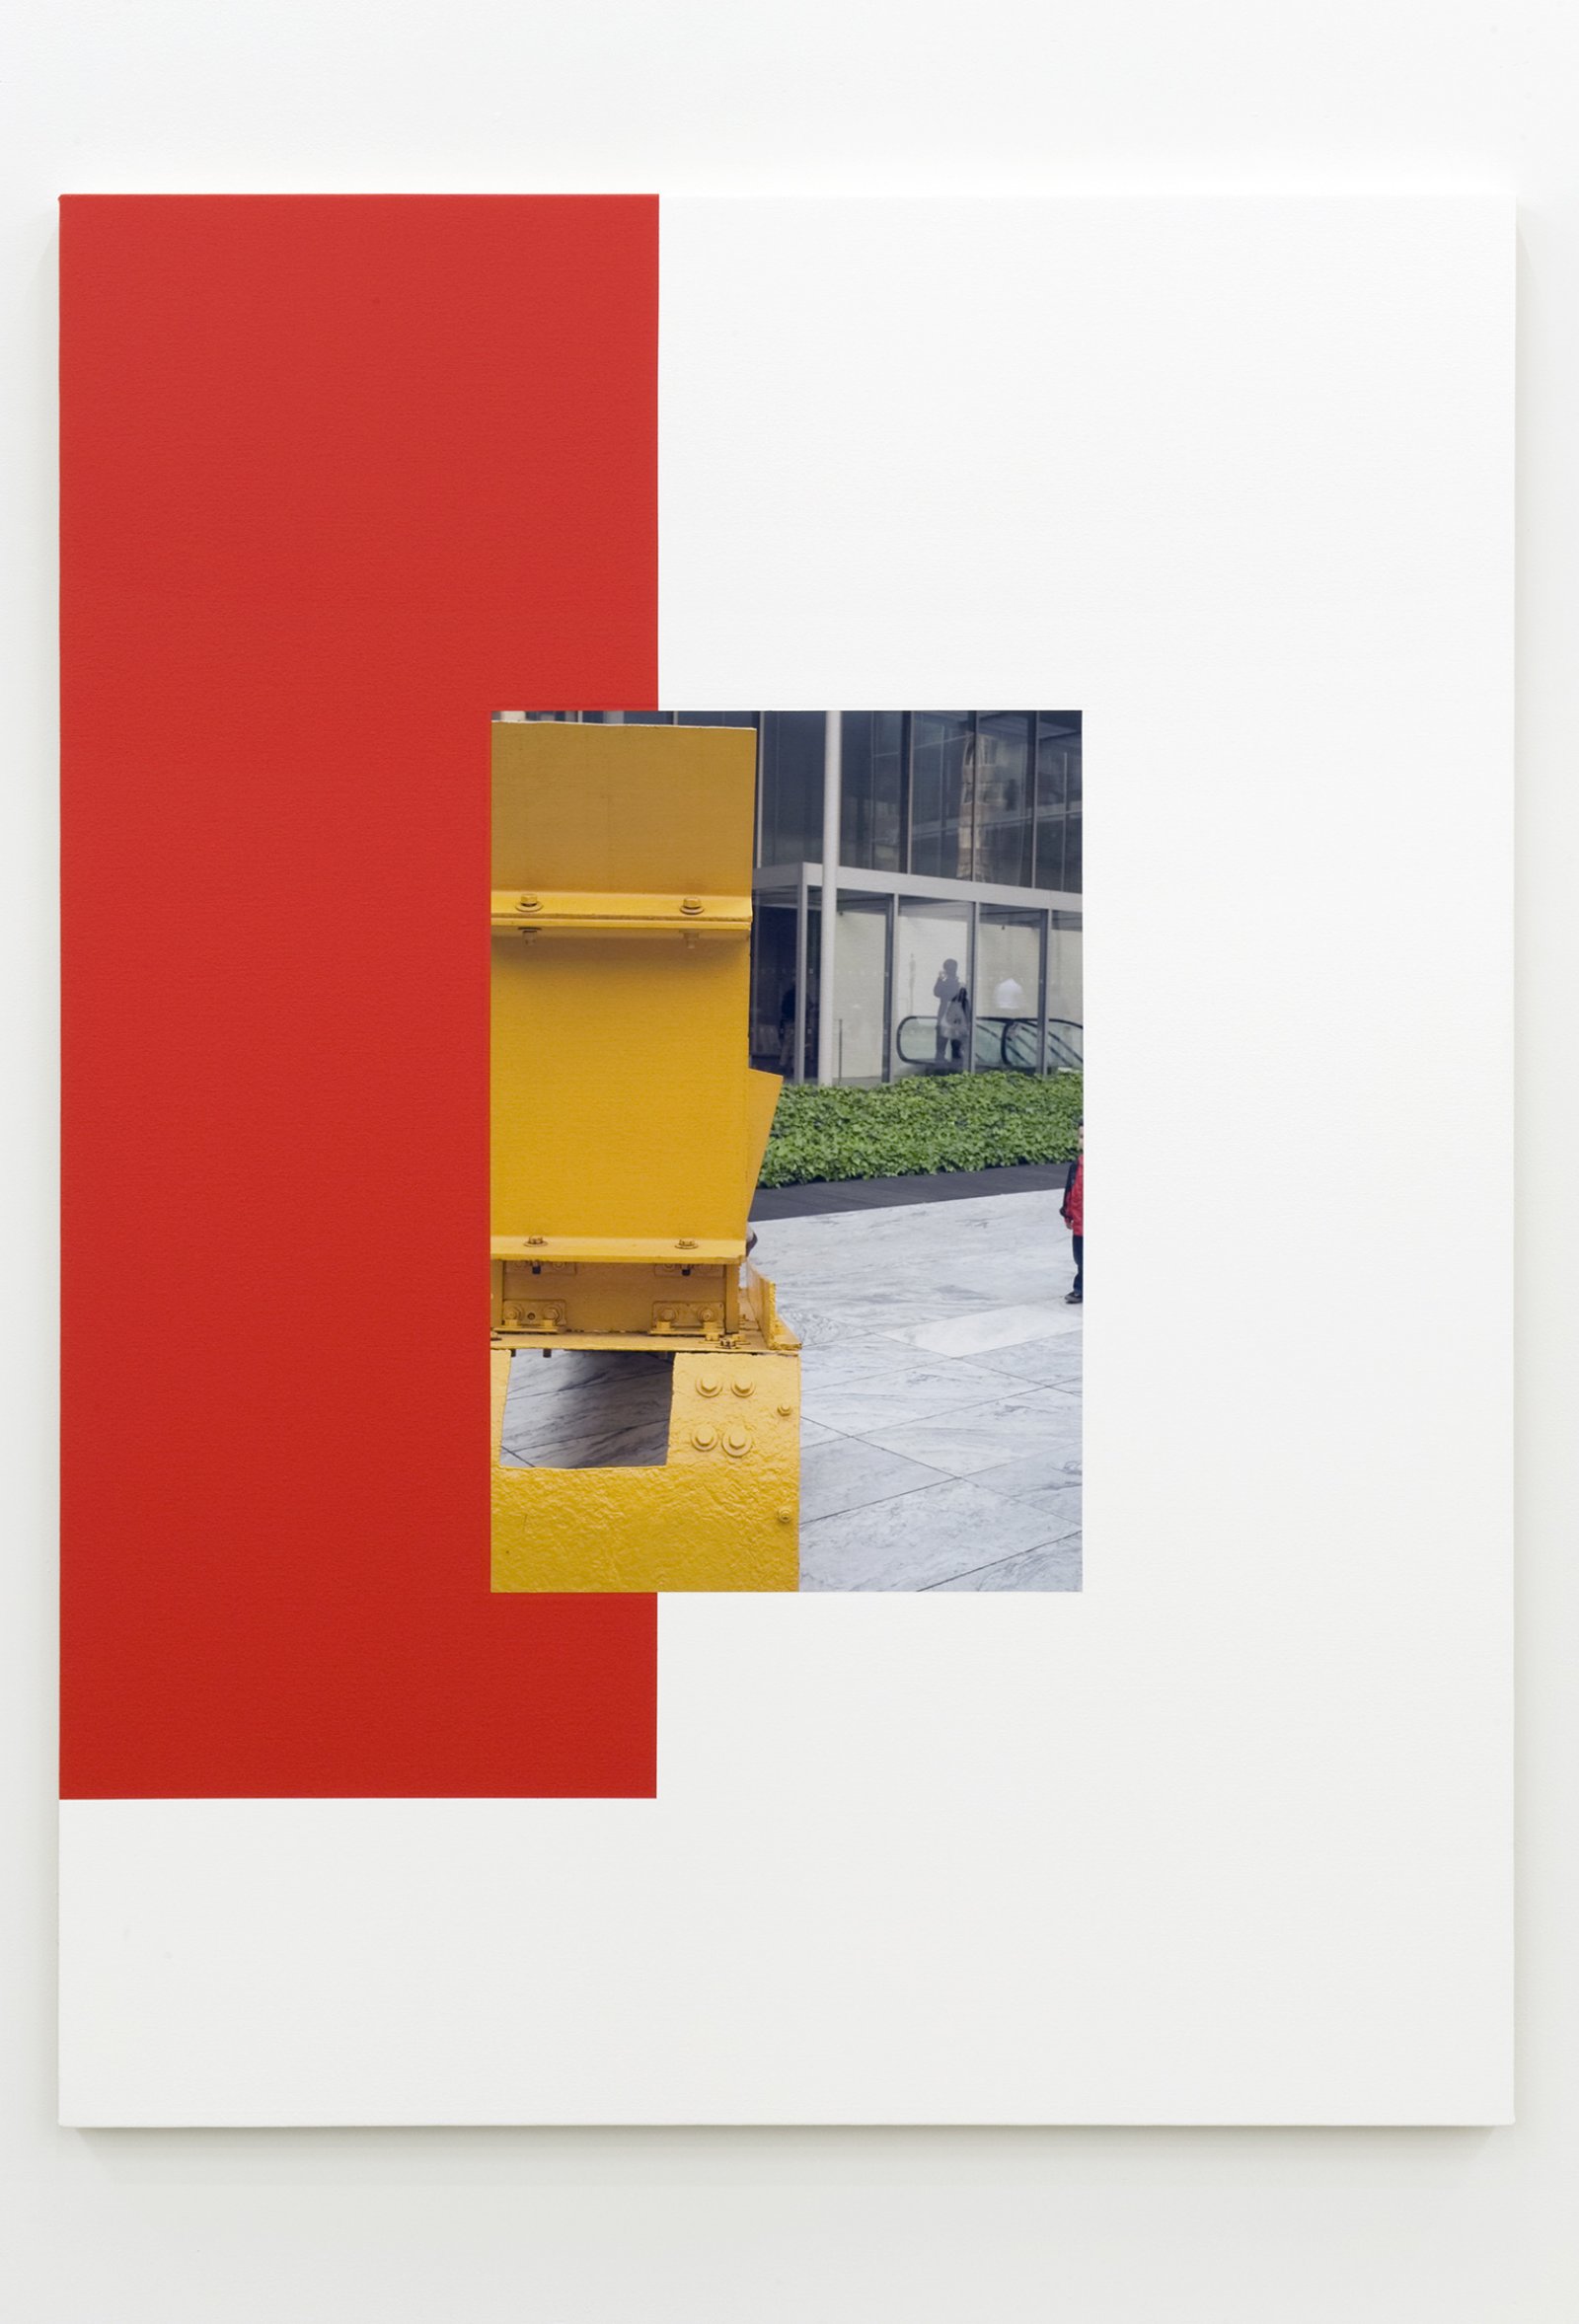 Ian Wallace, Abstract Sculpture (Red on White), 2011, photolaminate and acrylic on canvas, 80 x 60 in. (203 x 152 cm)